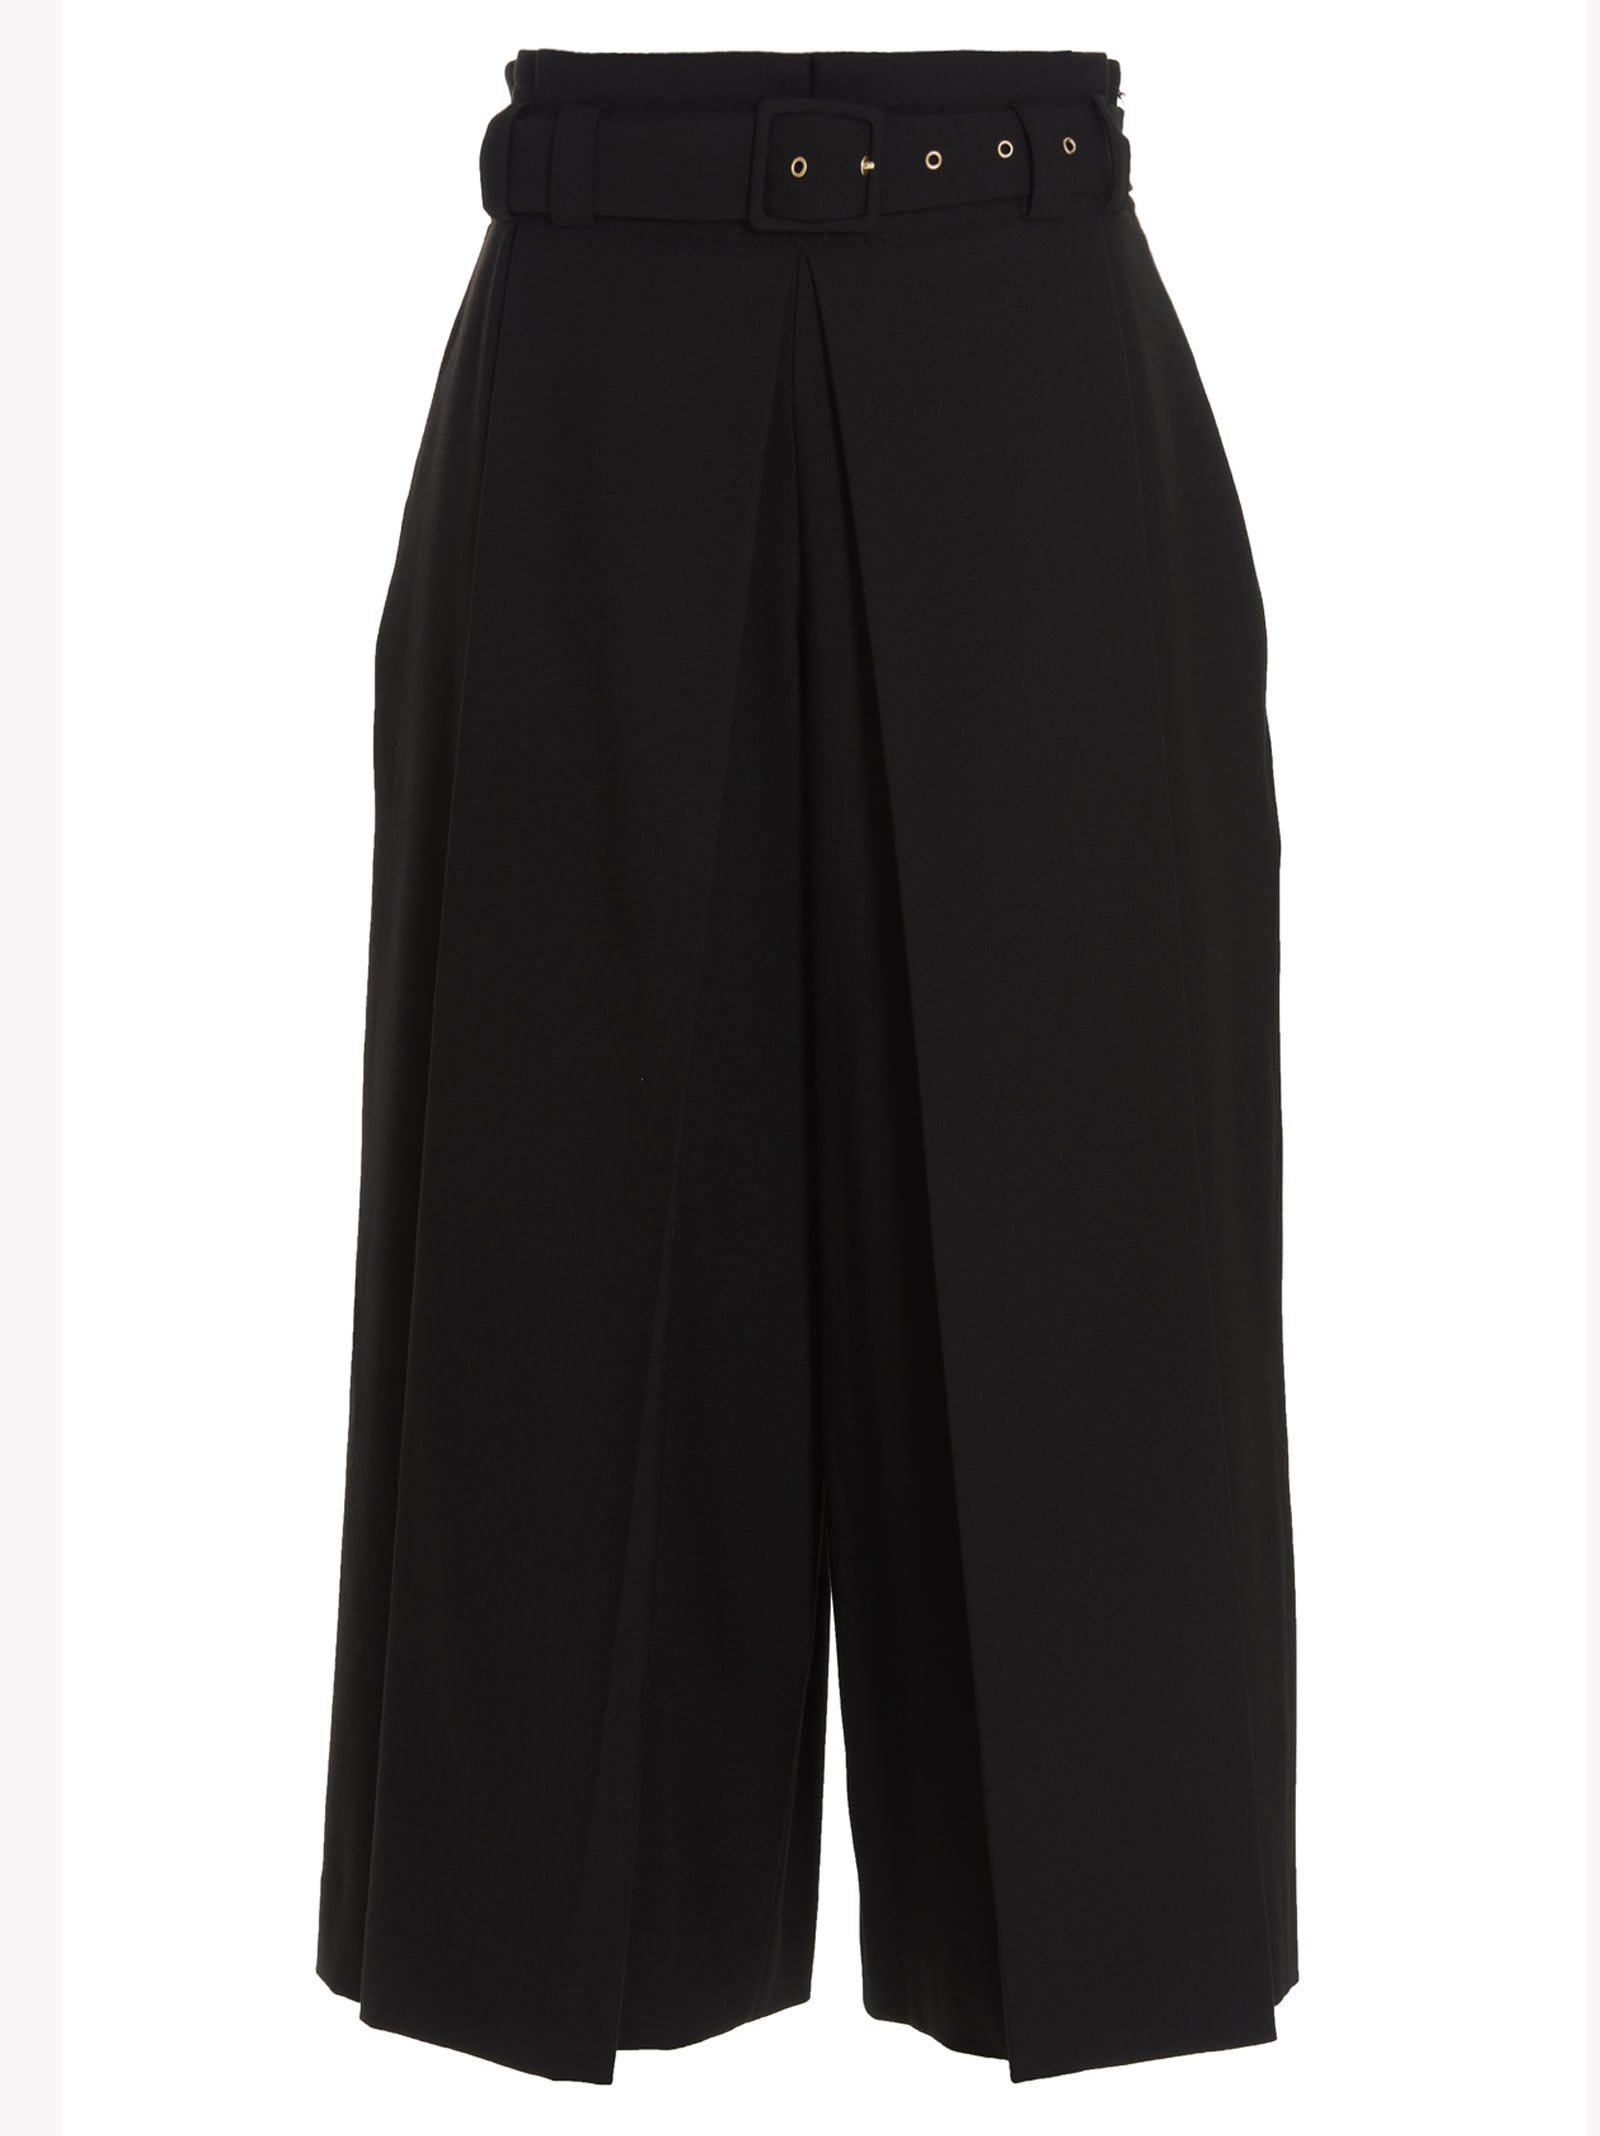 TwinSet Belted Culotte Pants